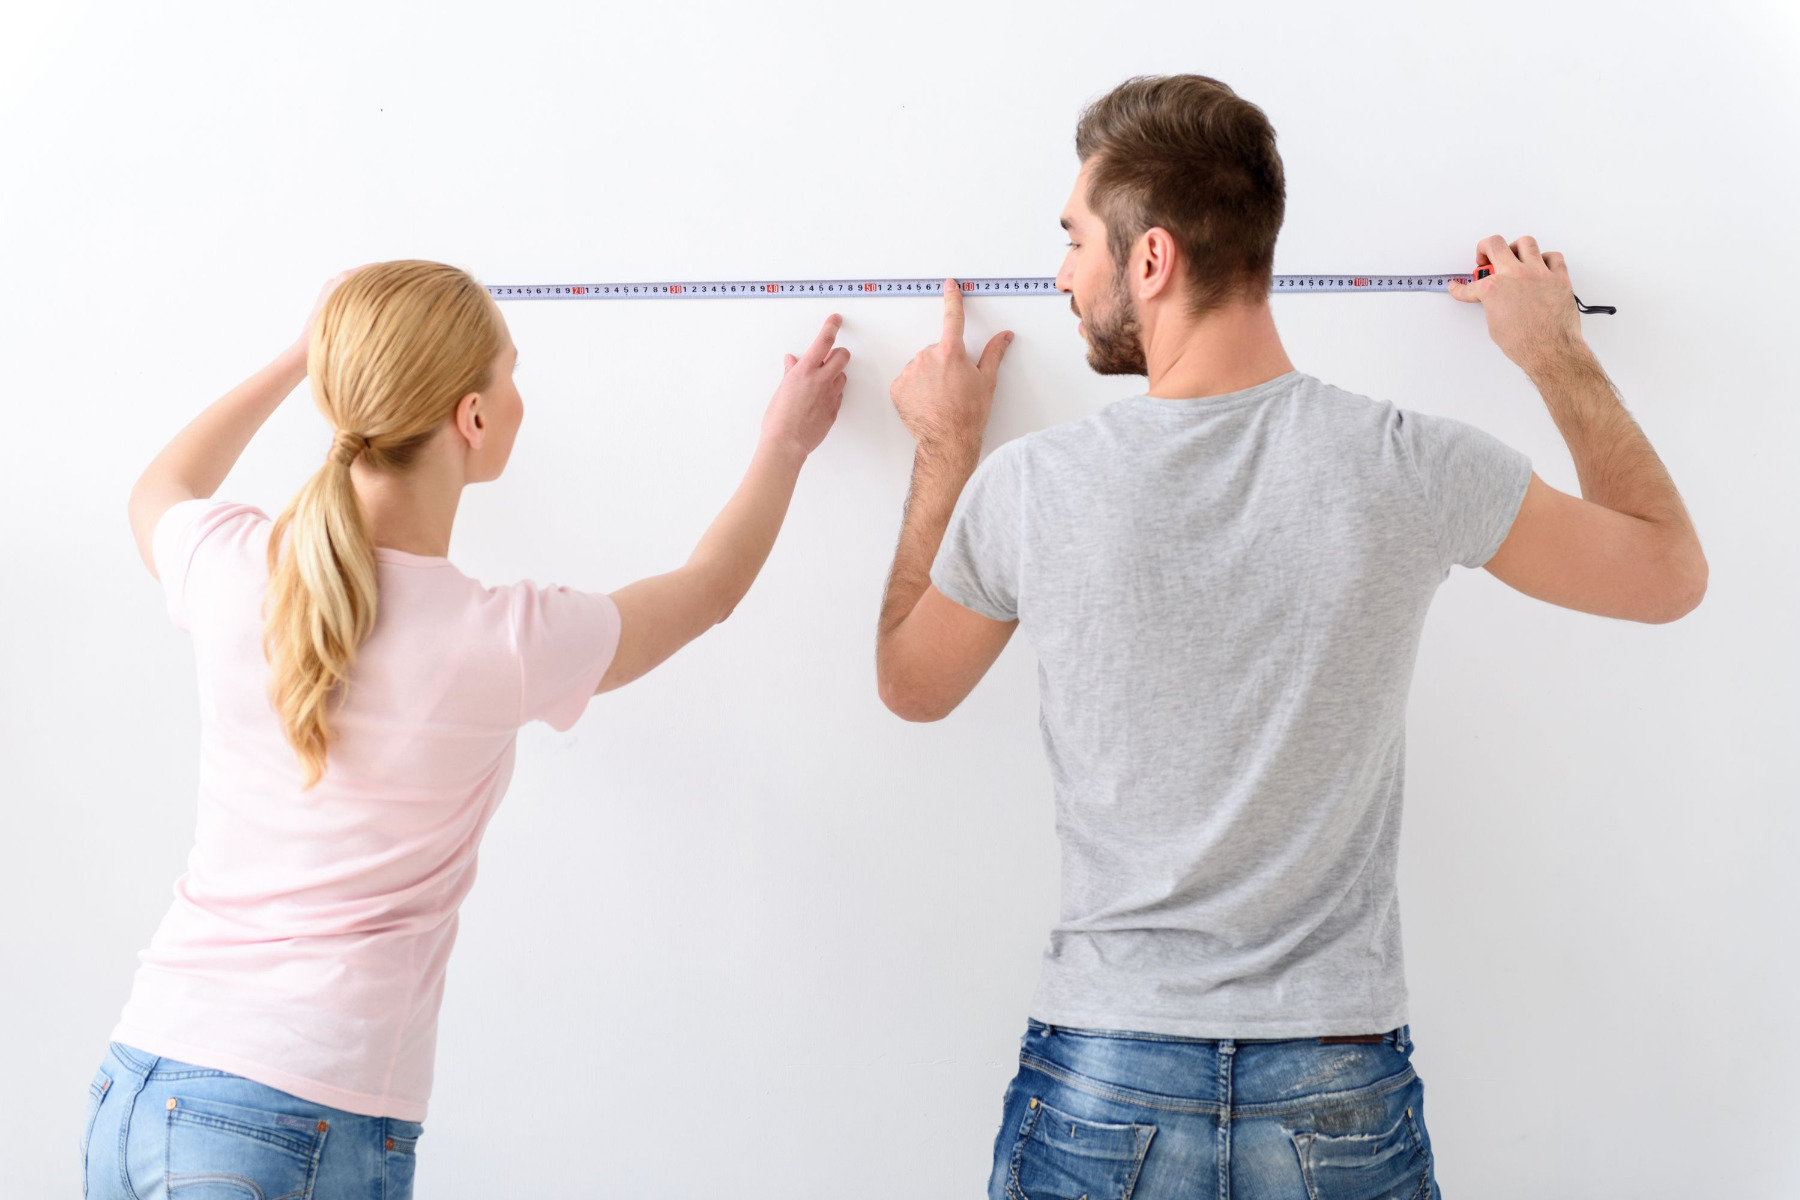 Wall Measuring For Wallpapering